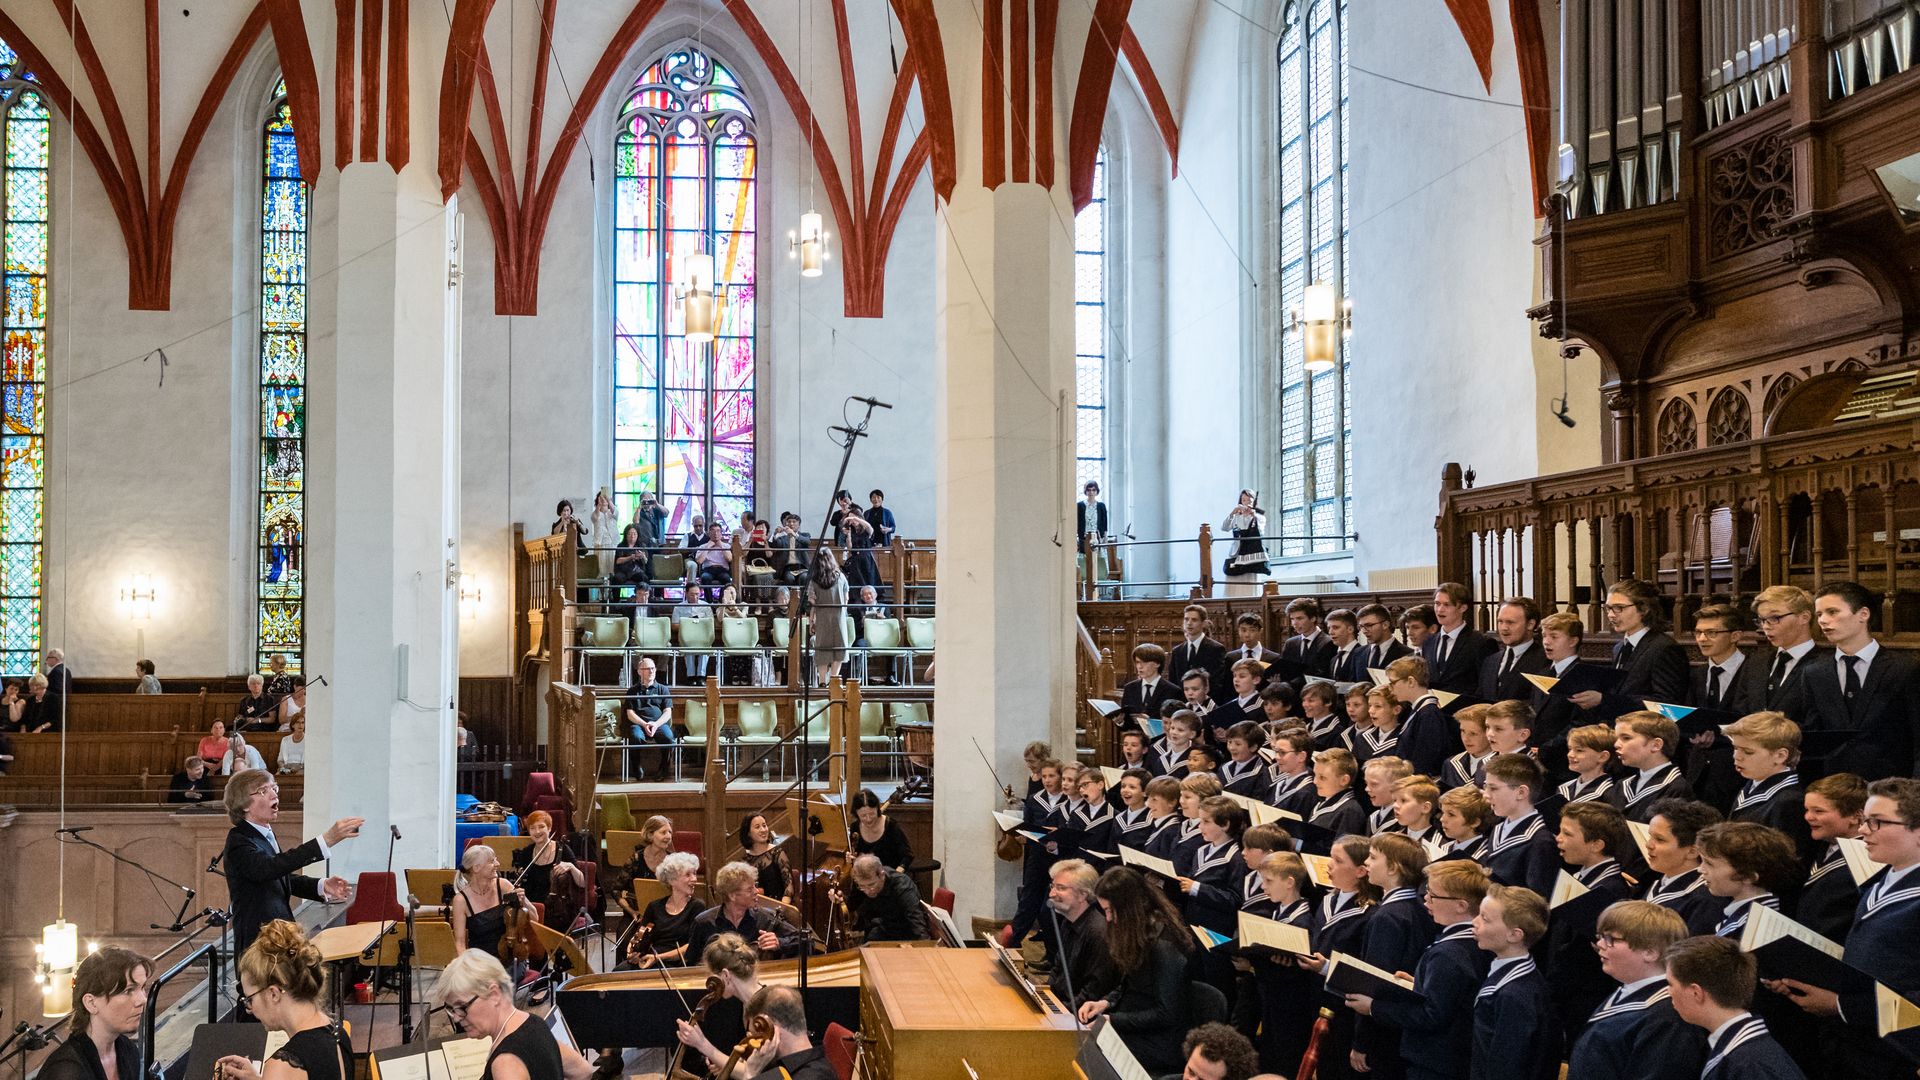 St. Thomas Boys Choir and Orchestra in front of the organ in St. Thomas Church as part of the Bach Festival Leipzig.